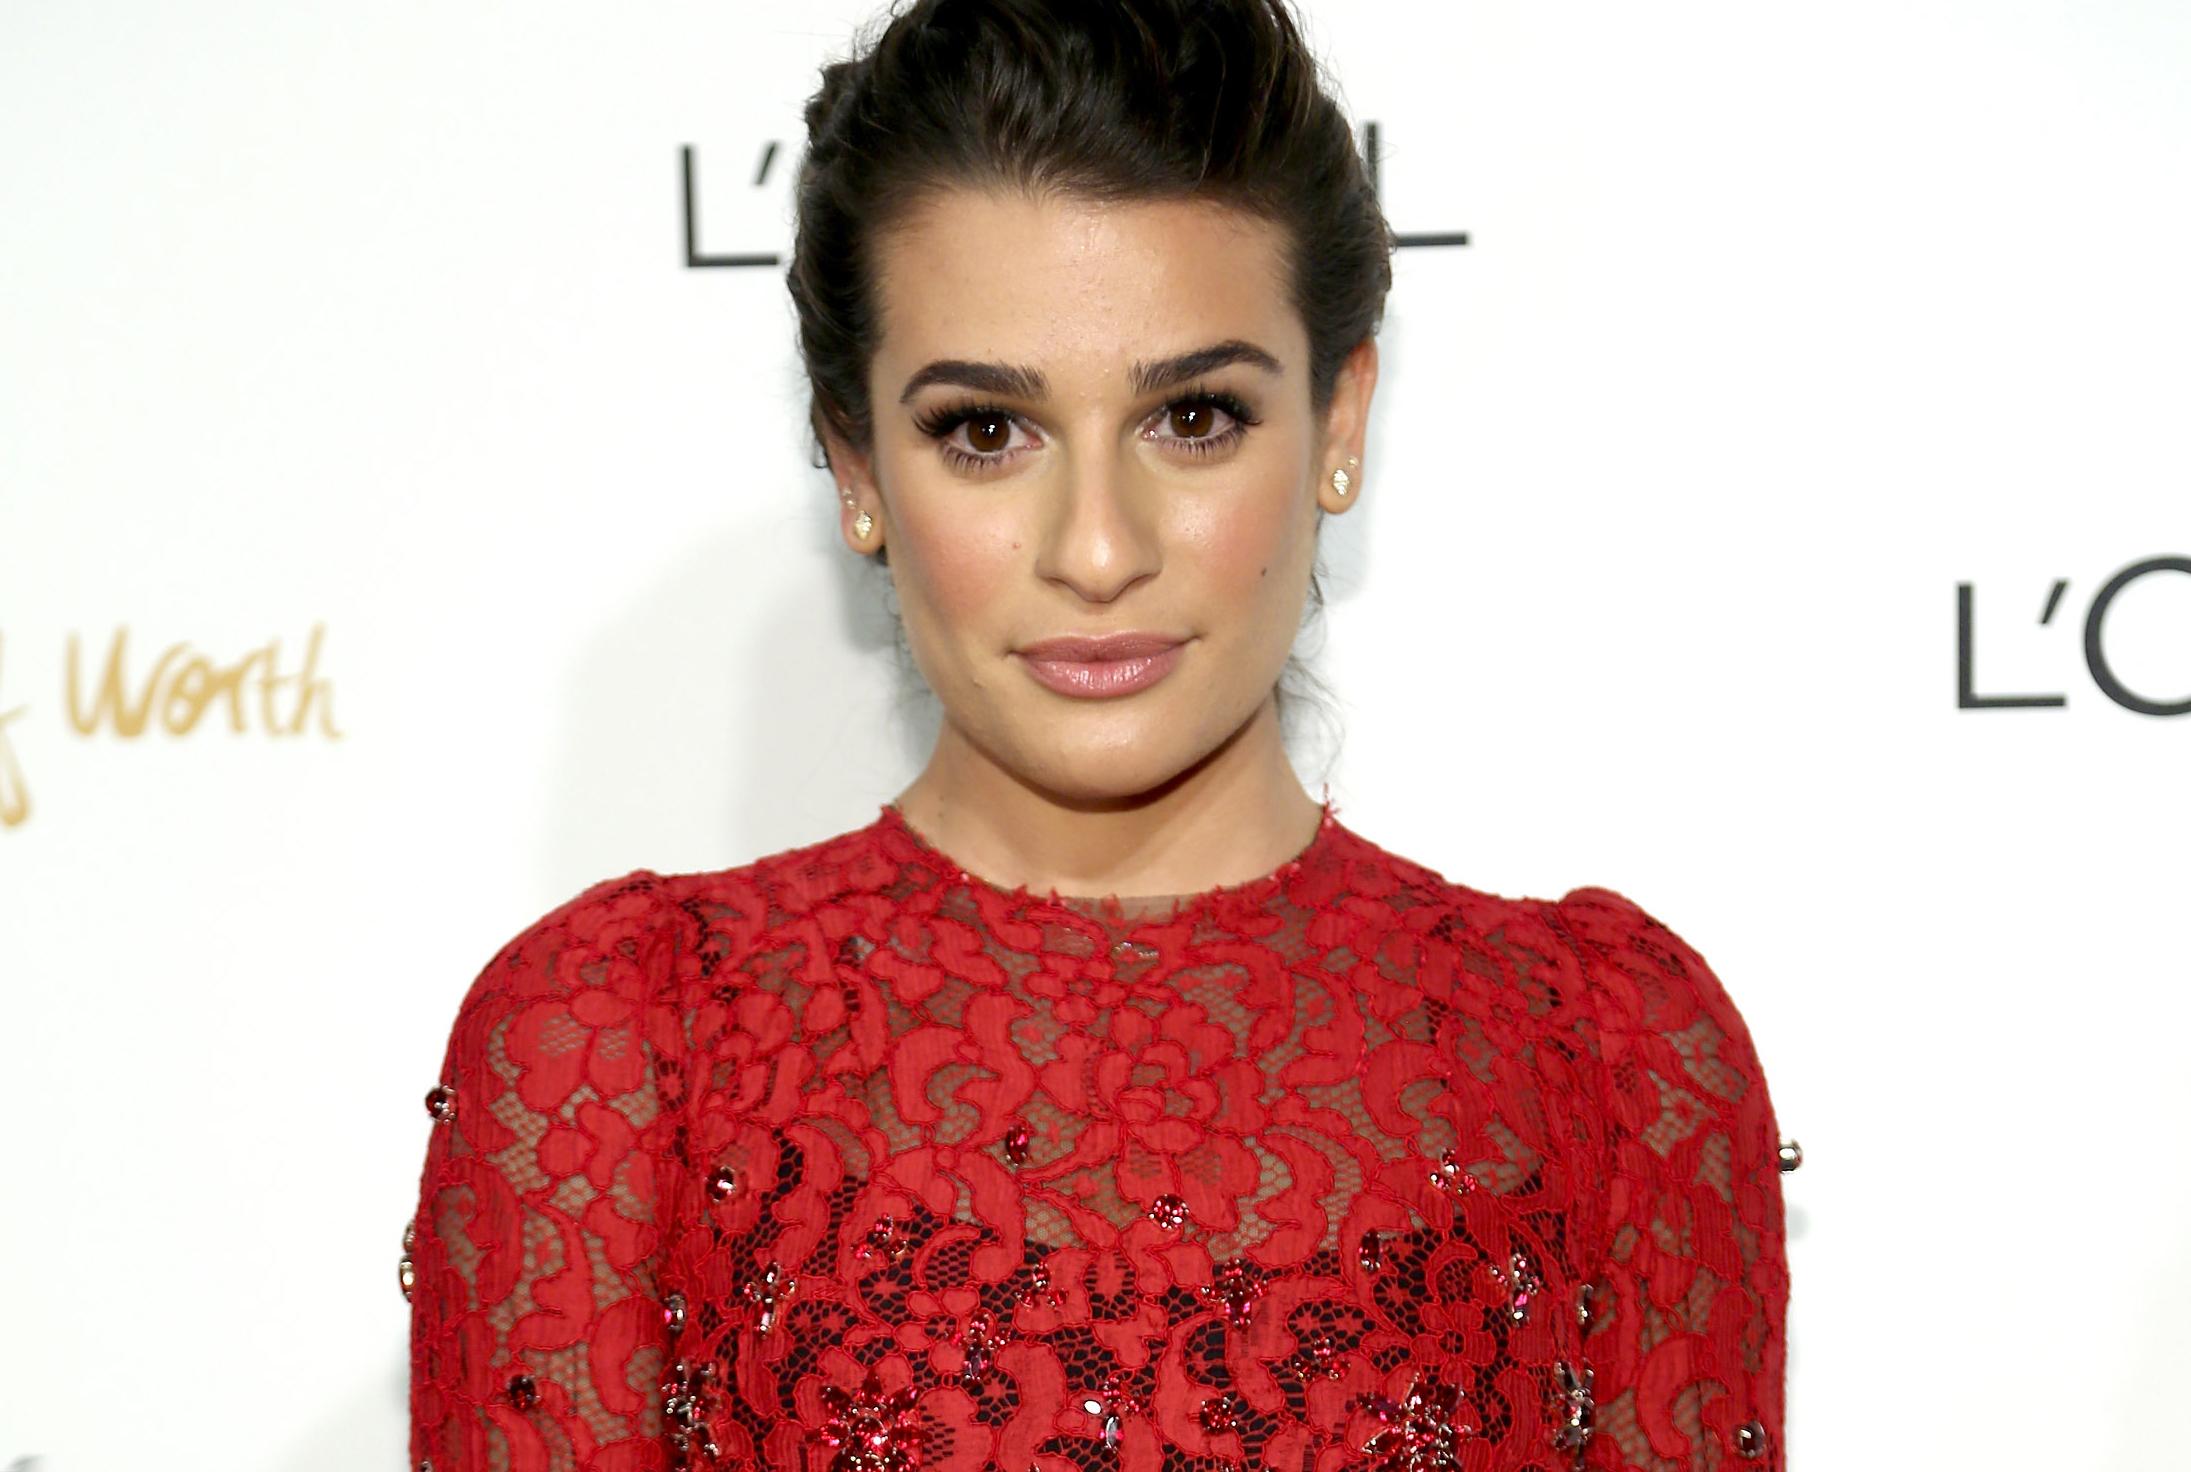 NEW YORK, NY - DECEMBER 03: Actress Lea Michele attends L'Oreal Paris' Women of Worth 2013 at The Pierre Hotel on December 3, 2013 in New York City. (Photo by Paul Zimmerman/WireImage)